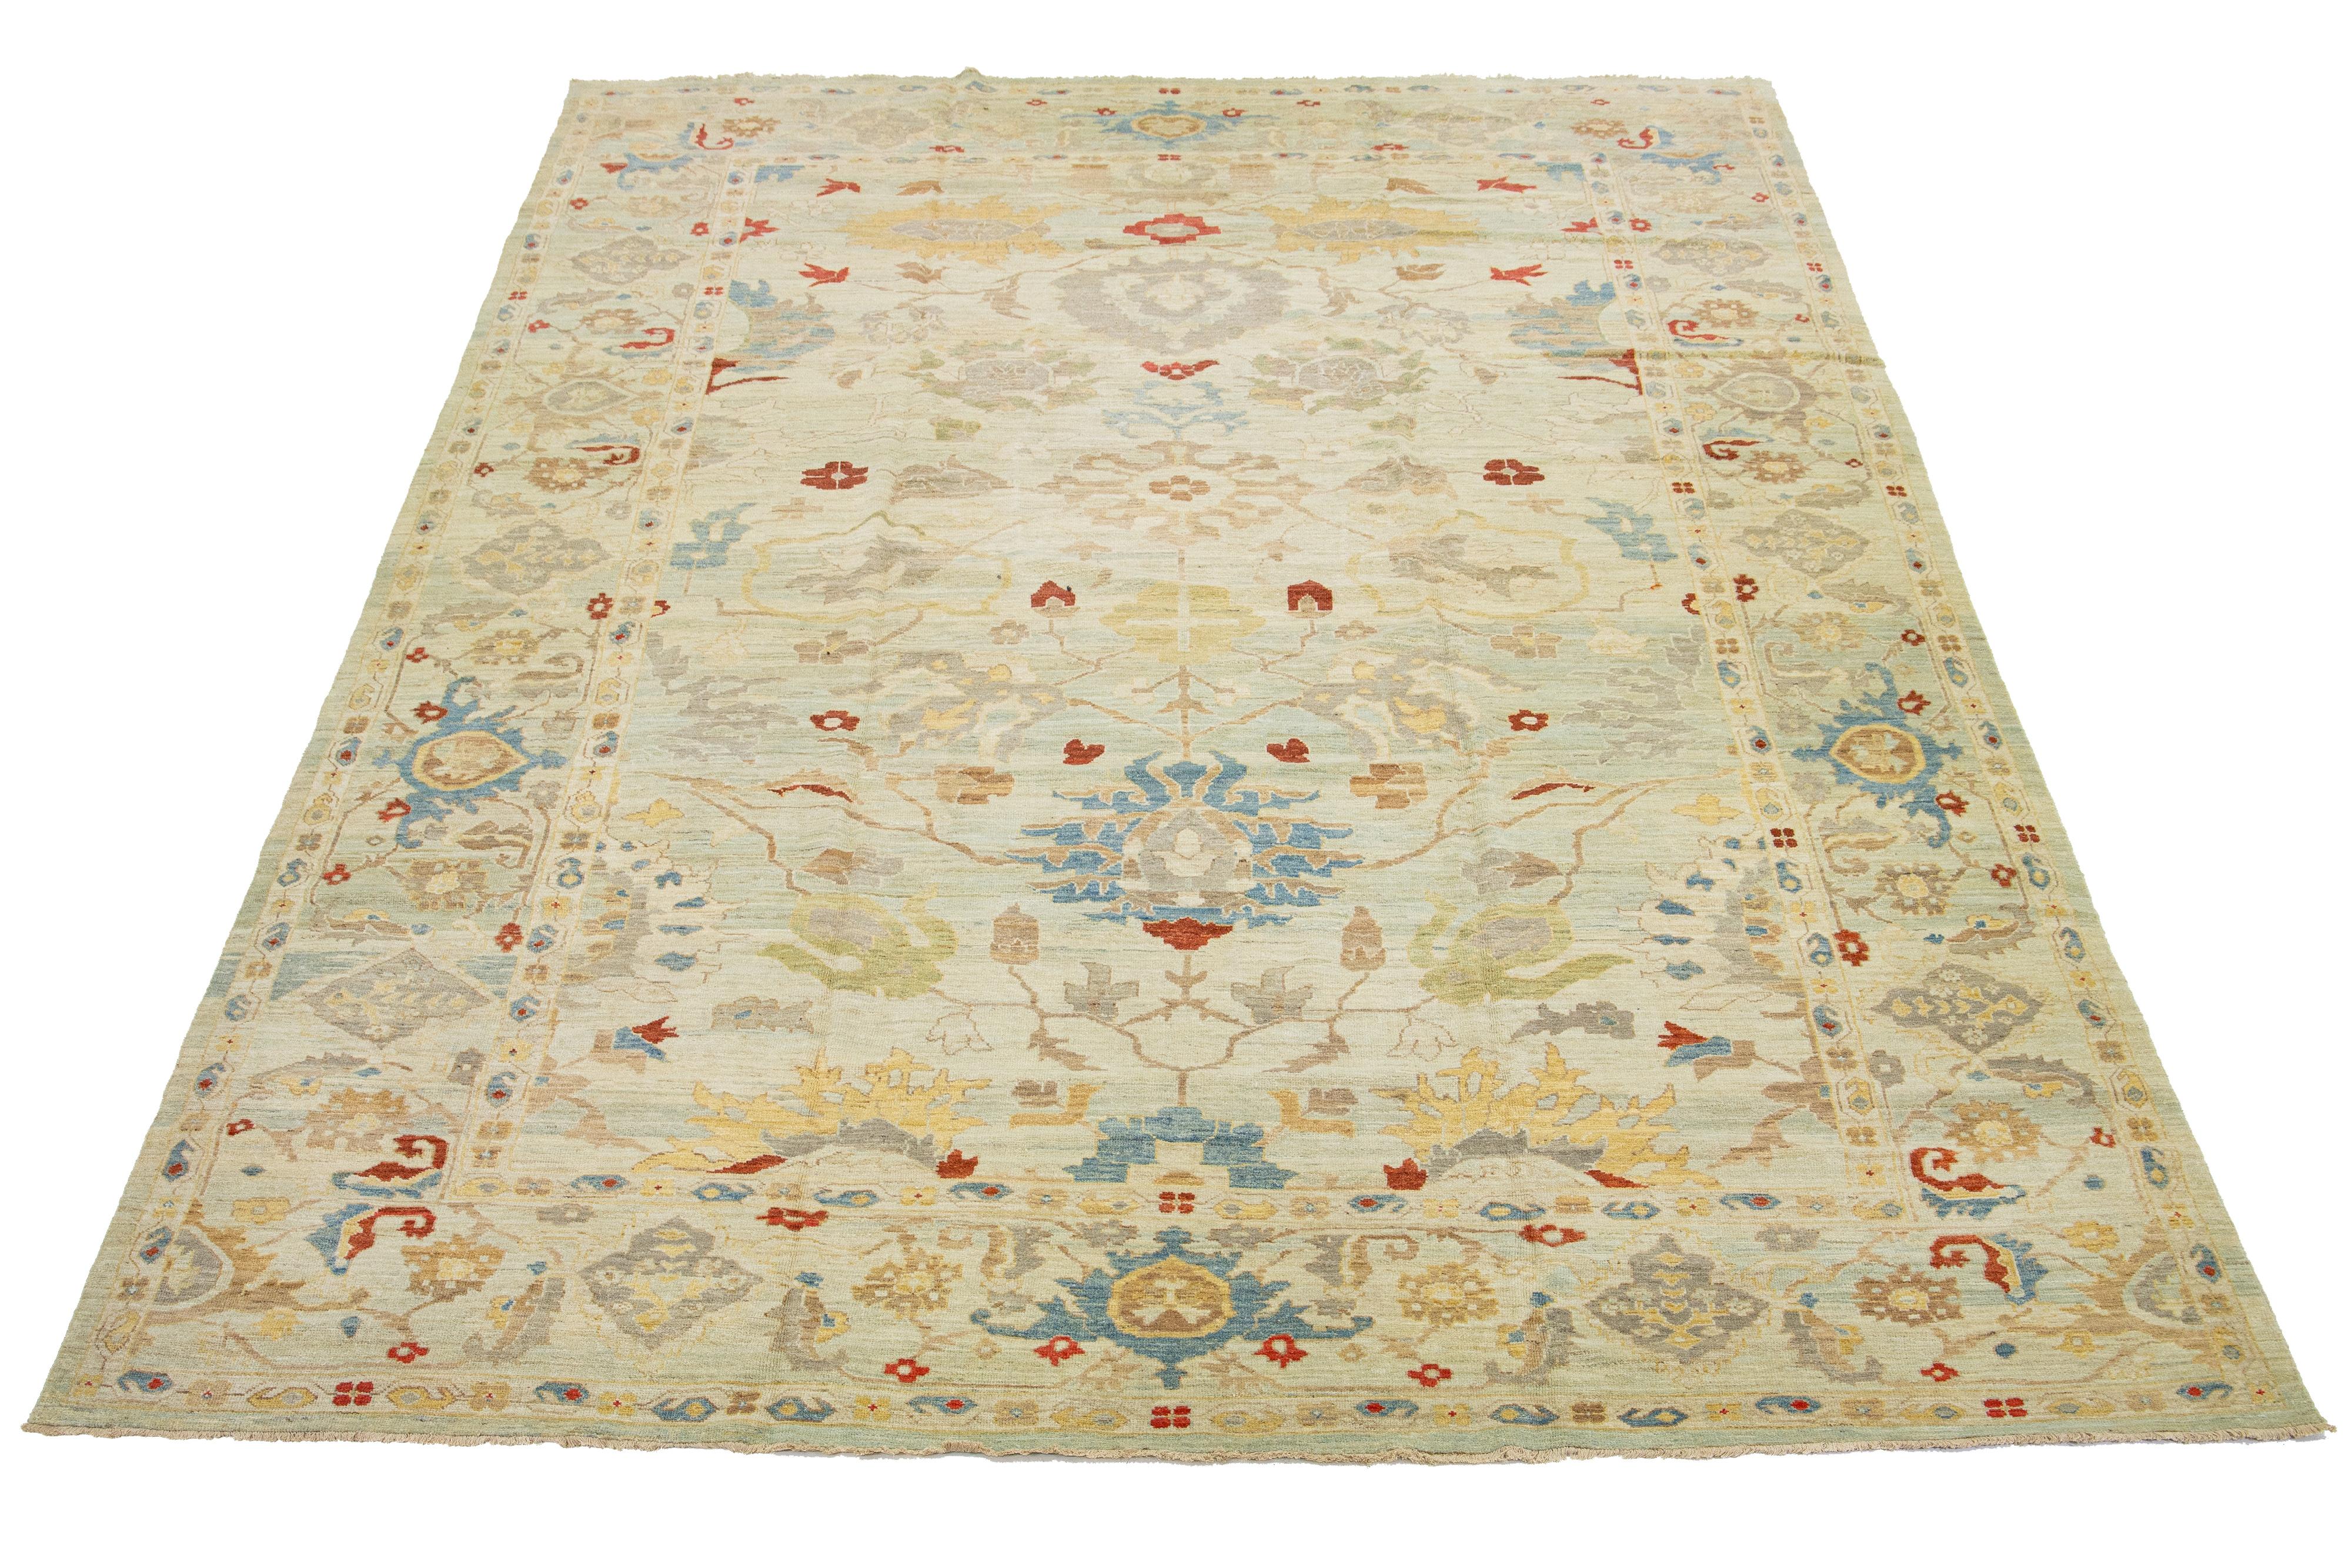 This is a beautiful contemporary Sultanabad Oversize rug, handcrafted using knotted wool. It features a light blue and beige field with multicolor accents in an all-over design. 

This rug measures 12' x 18' 6